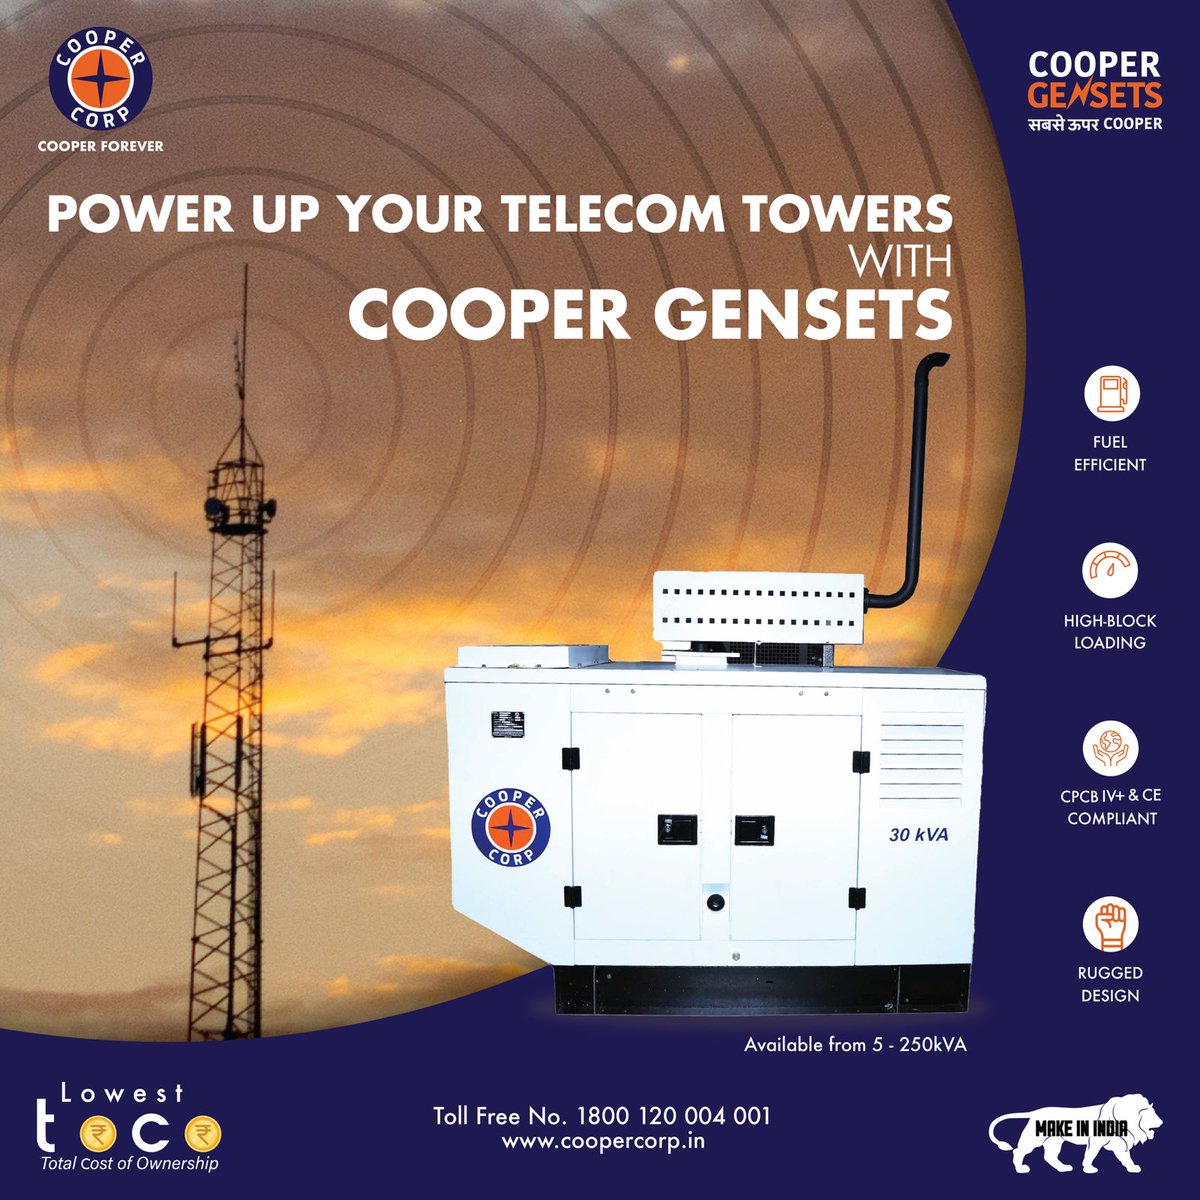 Empower your network with Cooper Gensets for reliable telecom towers performance.

#sabseoopercooper
#gensets
#coopergensets
#telecompower